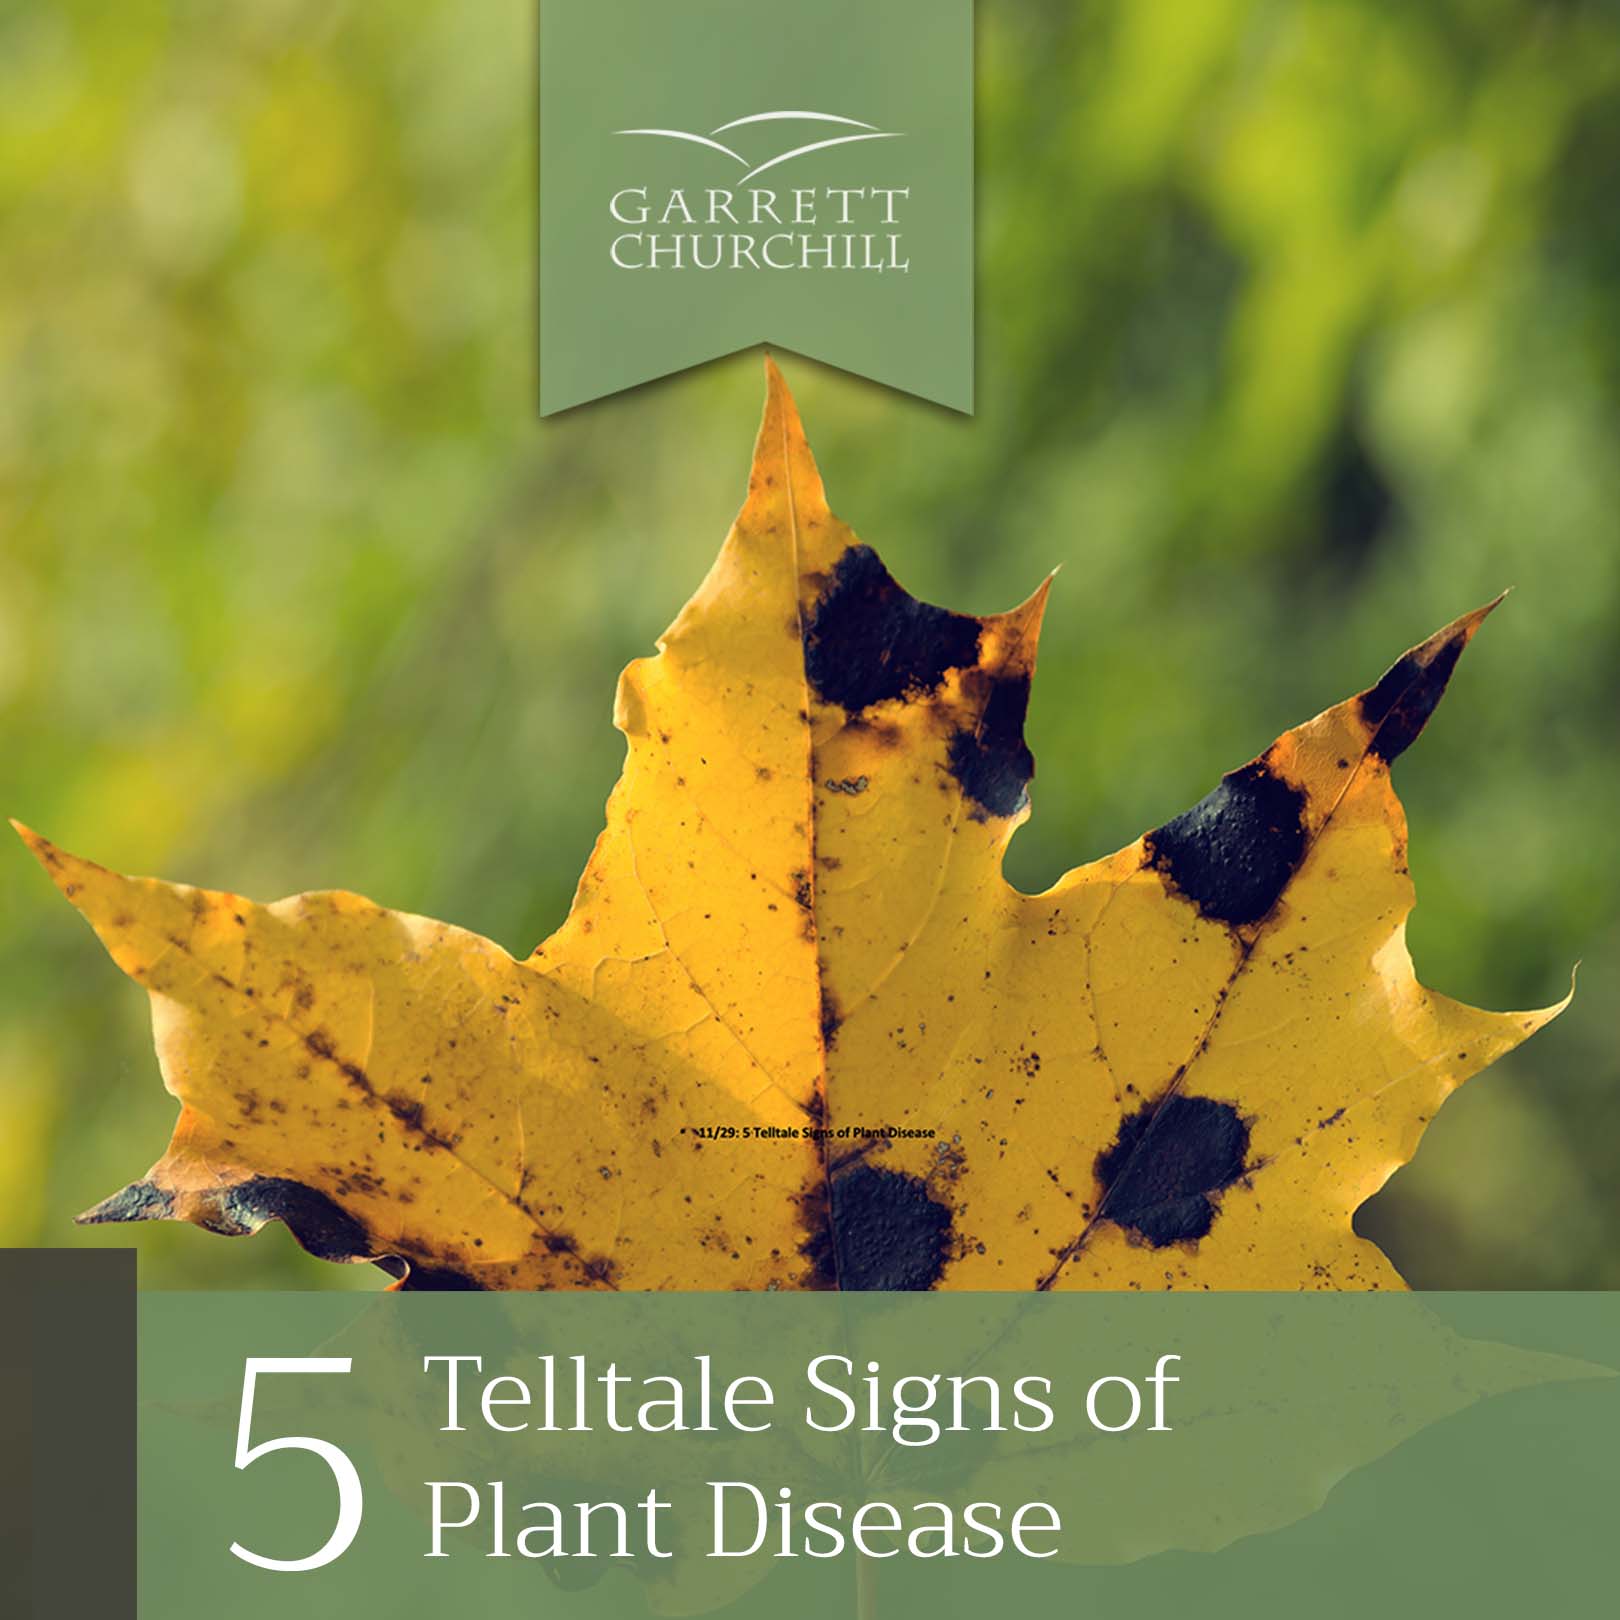 You are currently viewing 5 Telltale Signs of Plant Disease